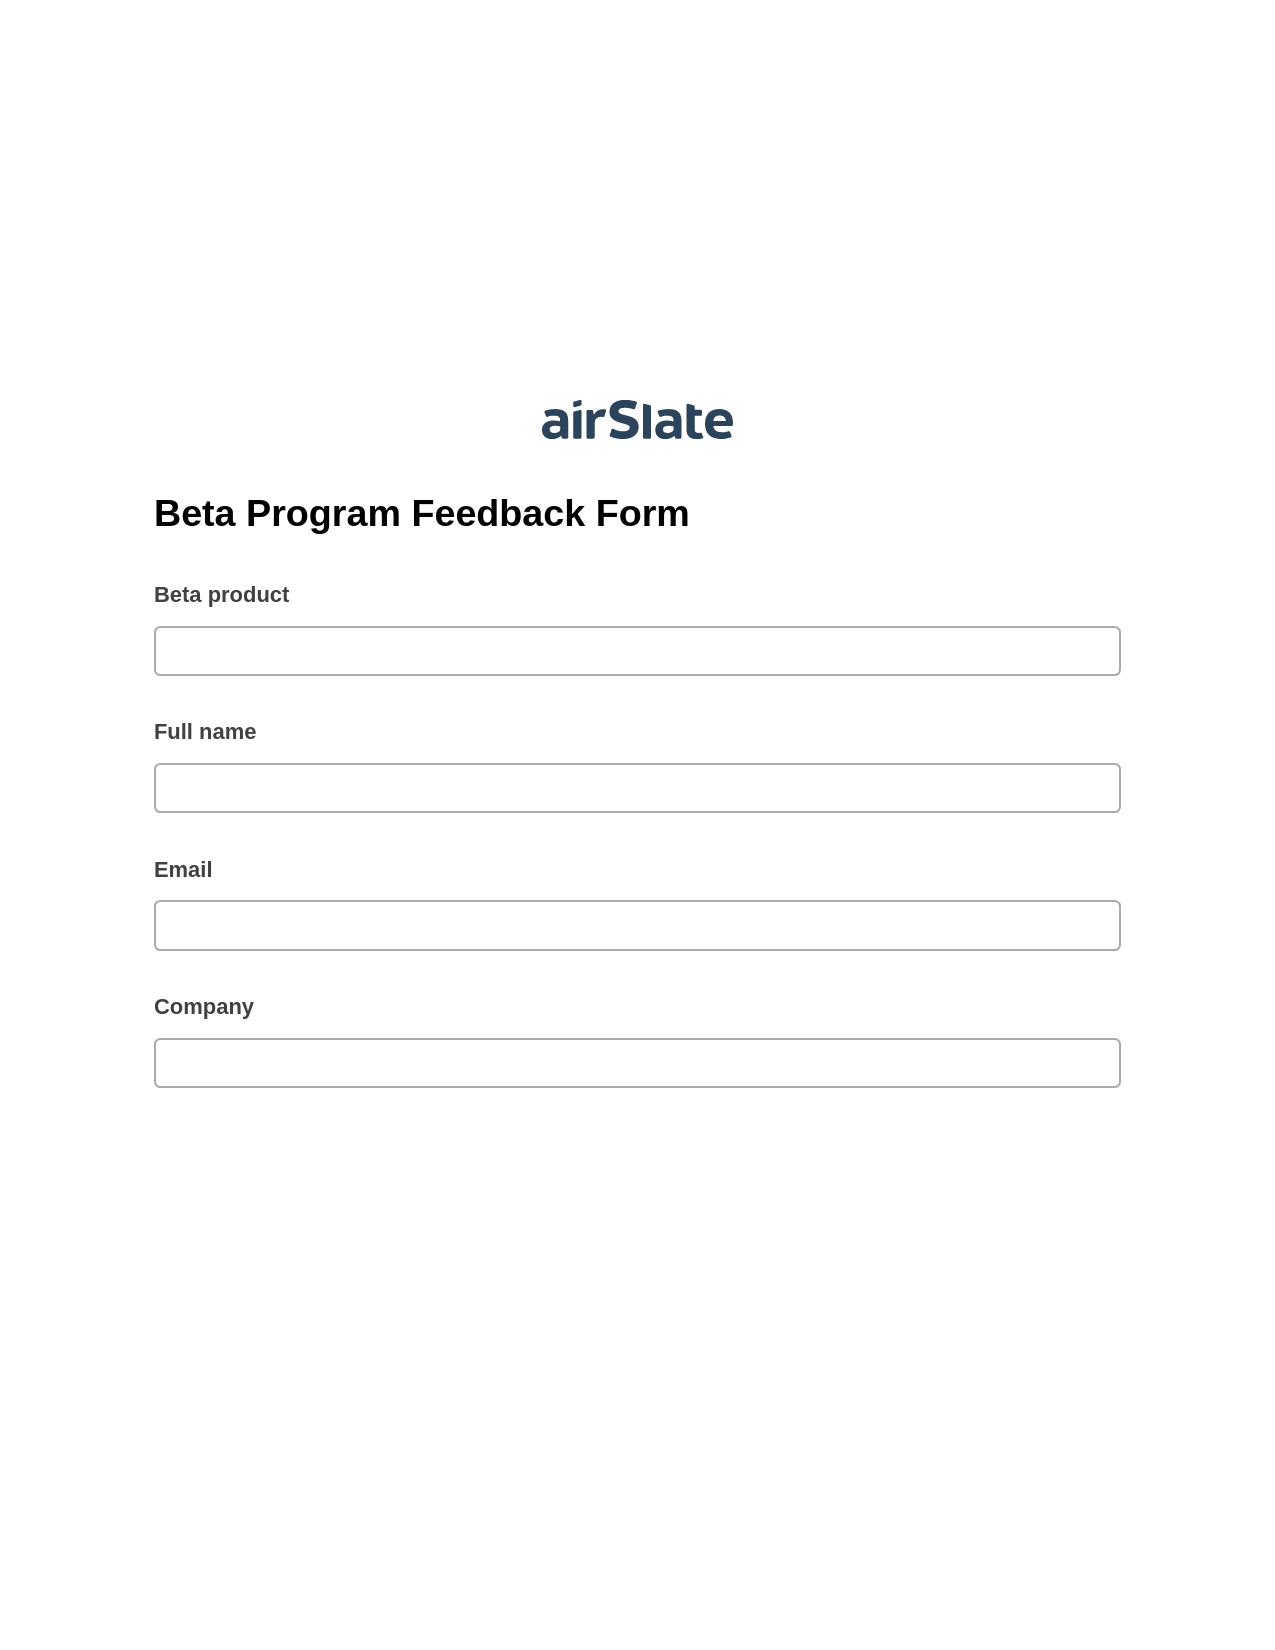 Beta Program Feedback Form Pre-fill Dropdowns from CSV File Bot, Assign Slate Name Bot, Export to Smartsheet